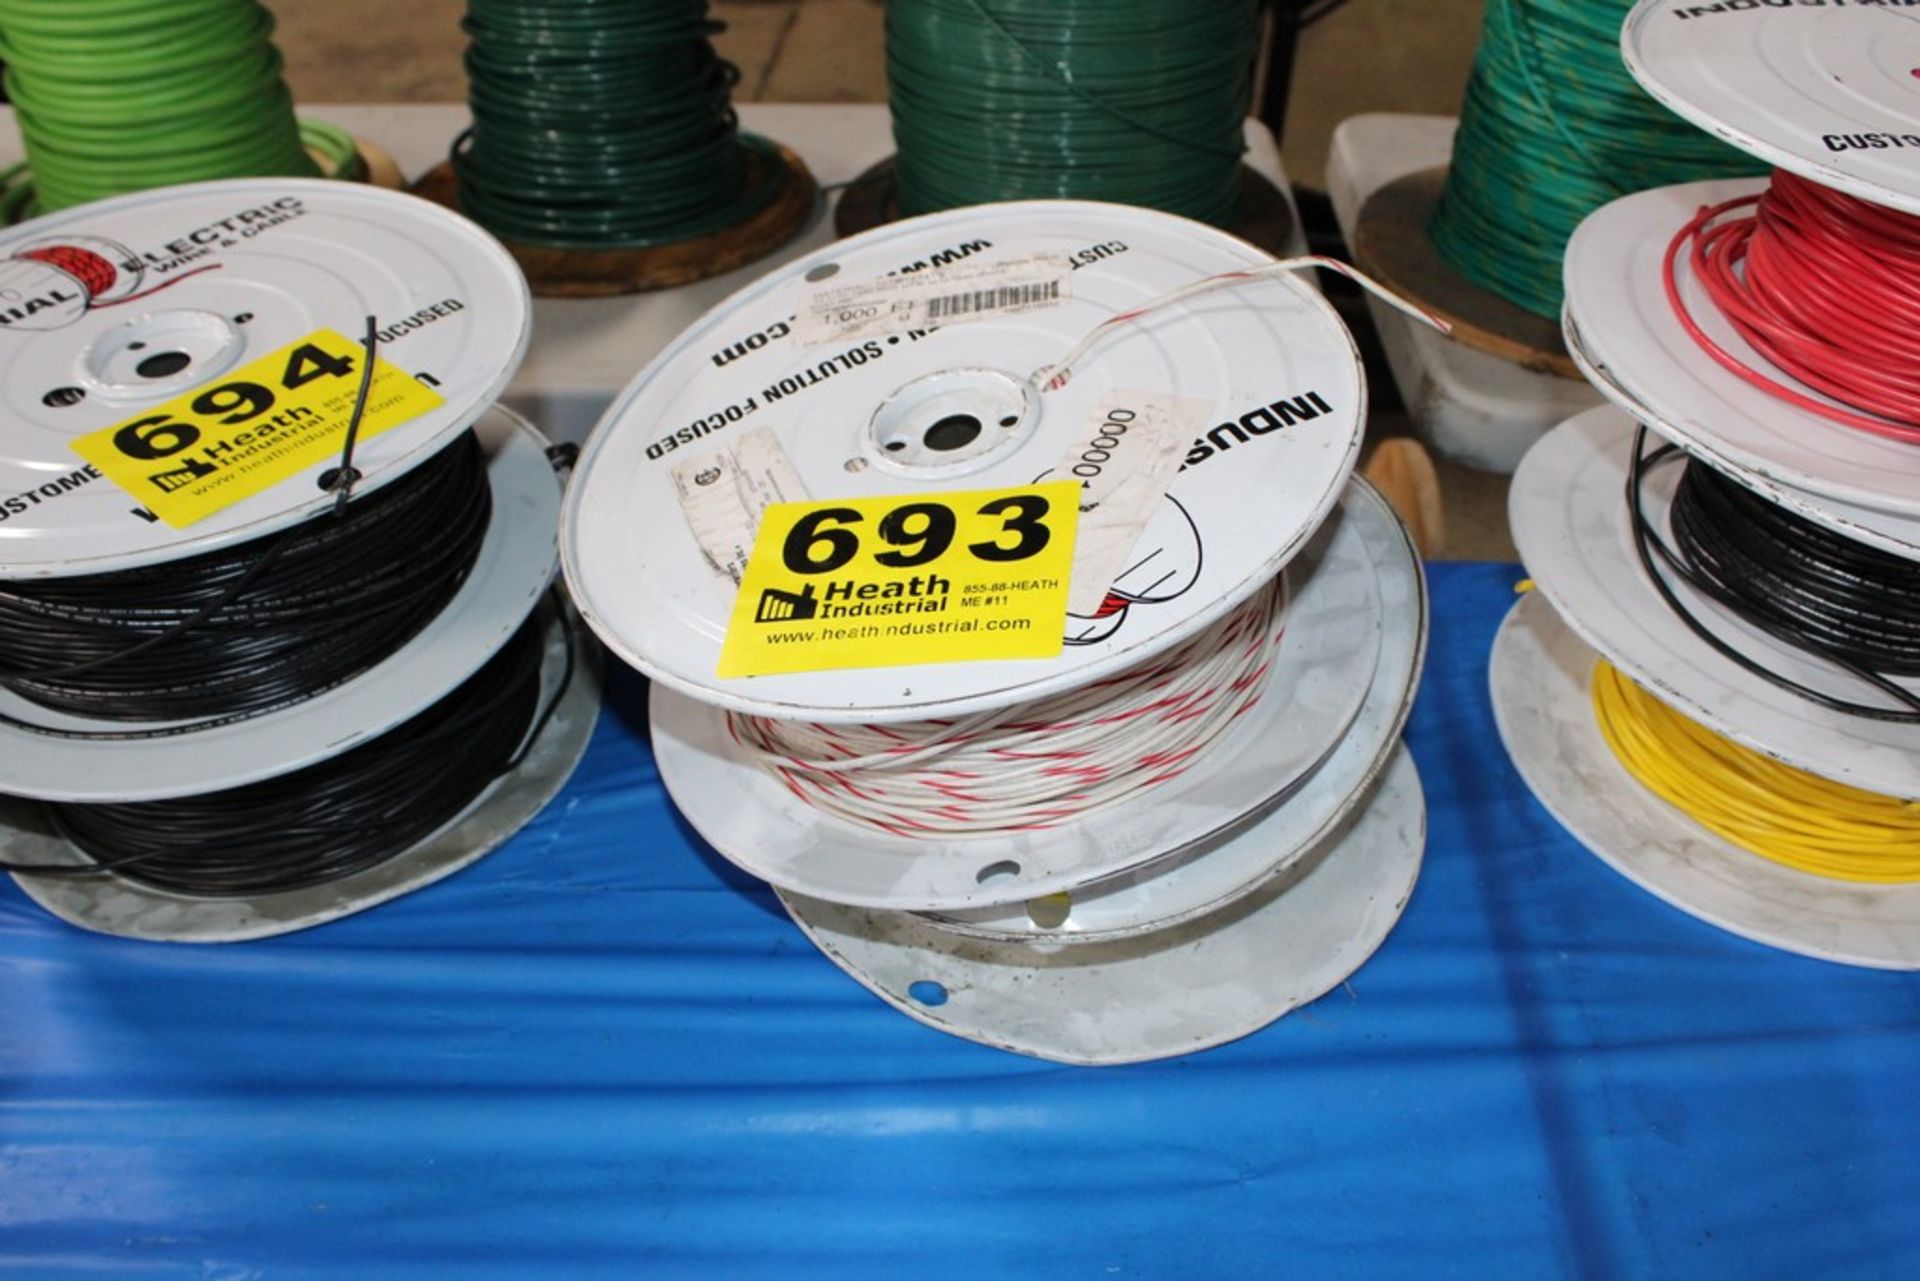 (2) SPOOLS OF INDUSTRIAL ELECTRIC 14 AWG & 16 AWG WIRE